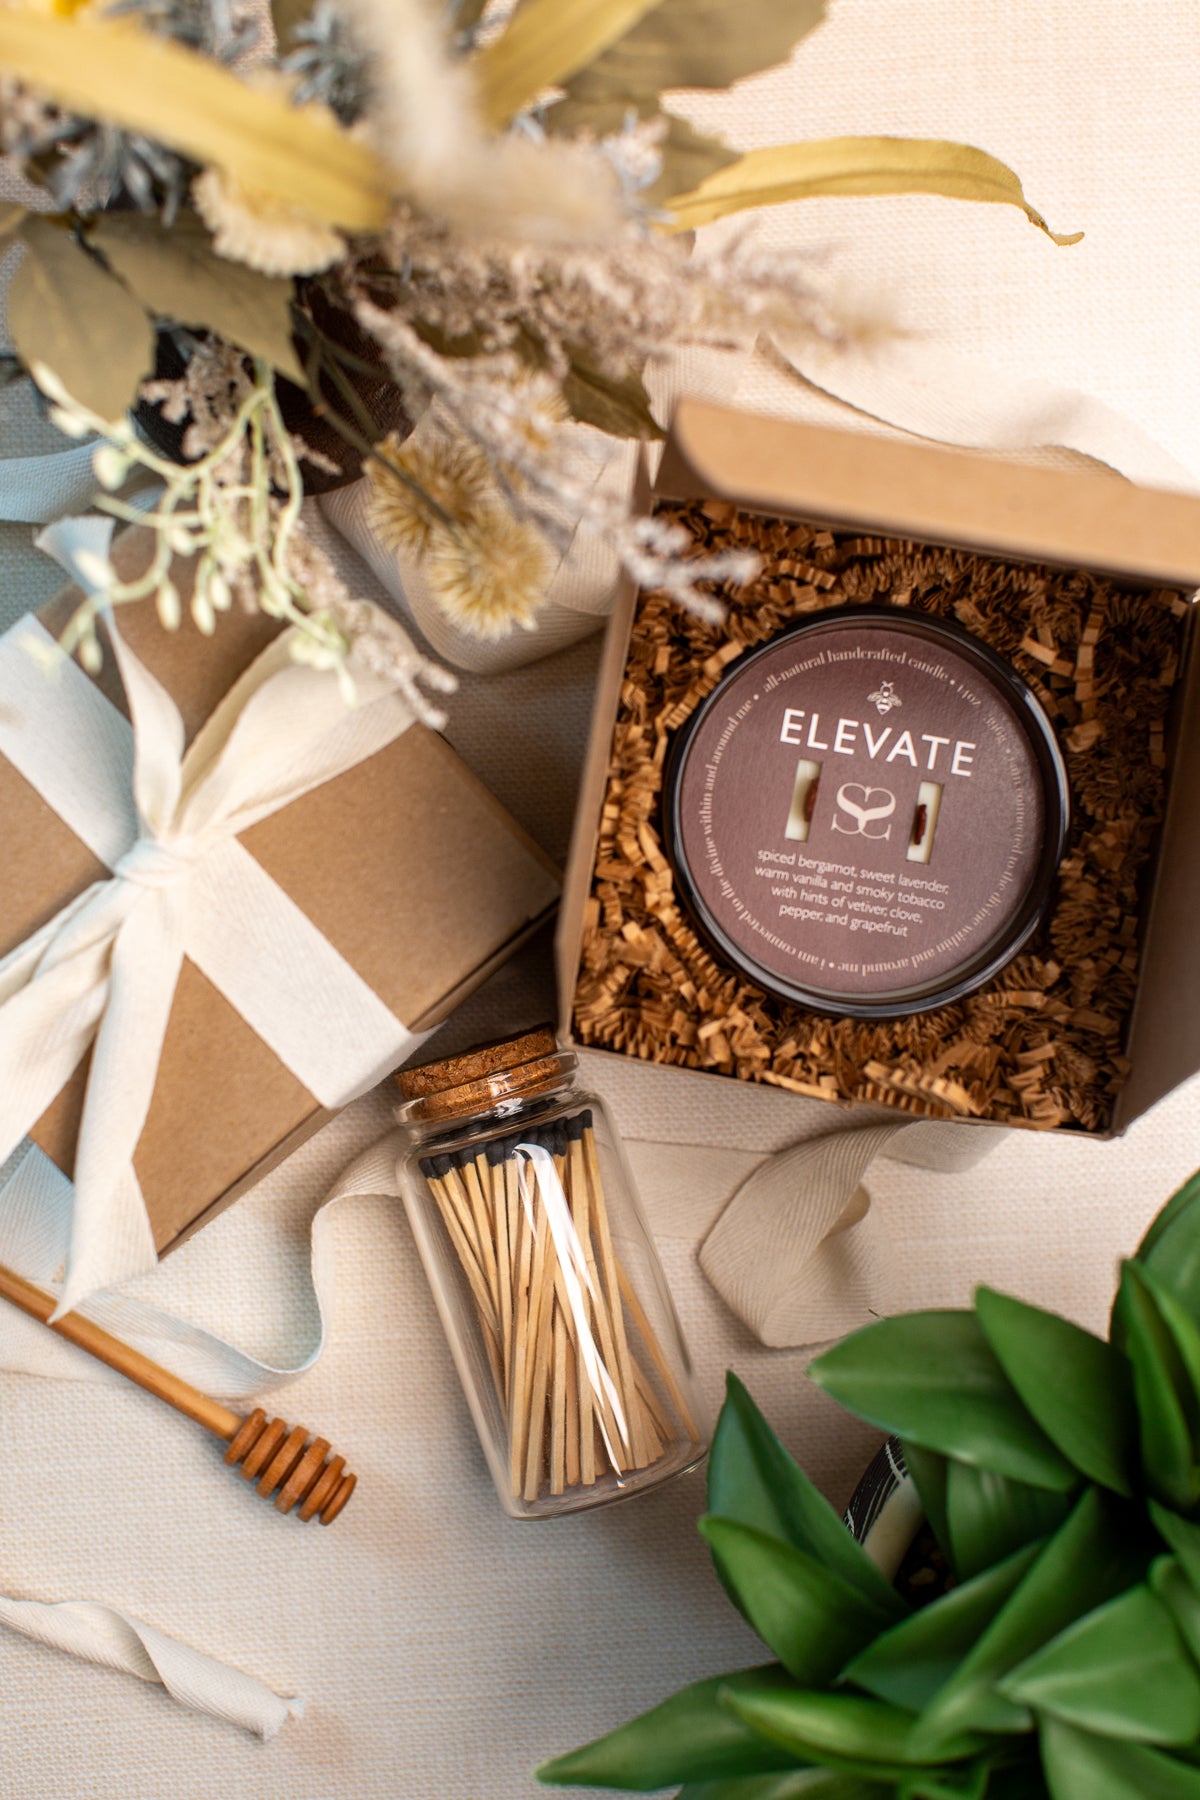 ELEVATE: 14oz All-Natural Candle